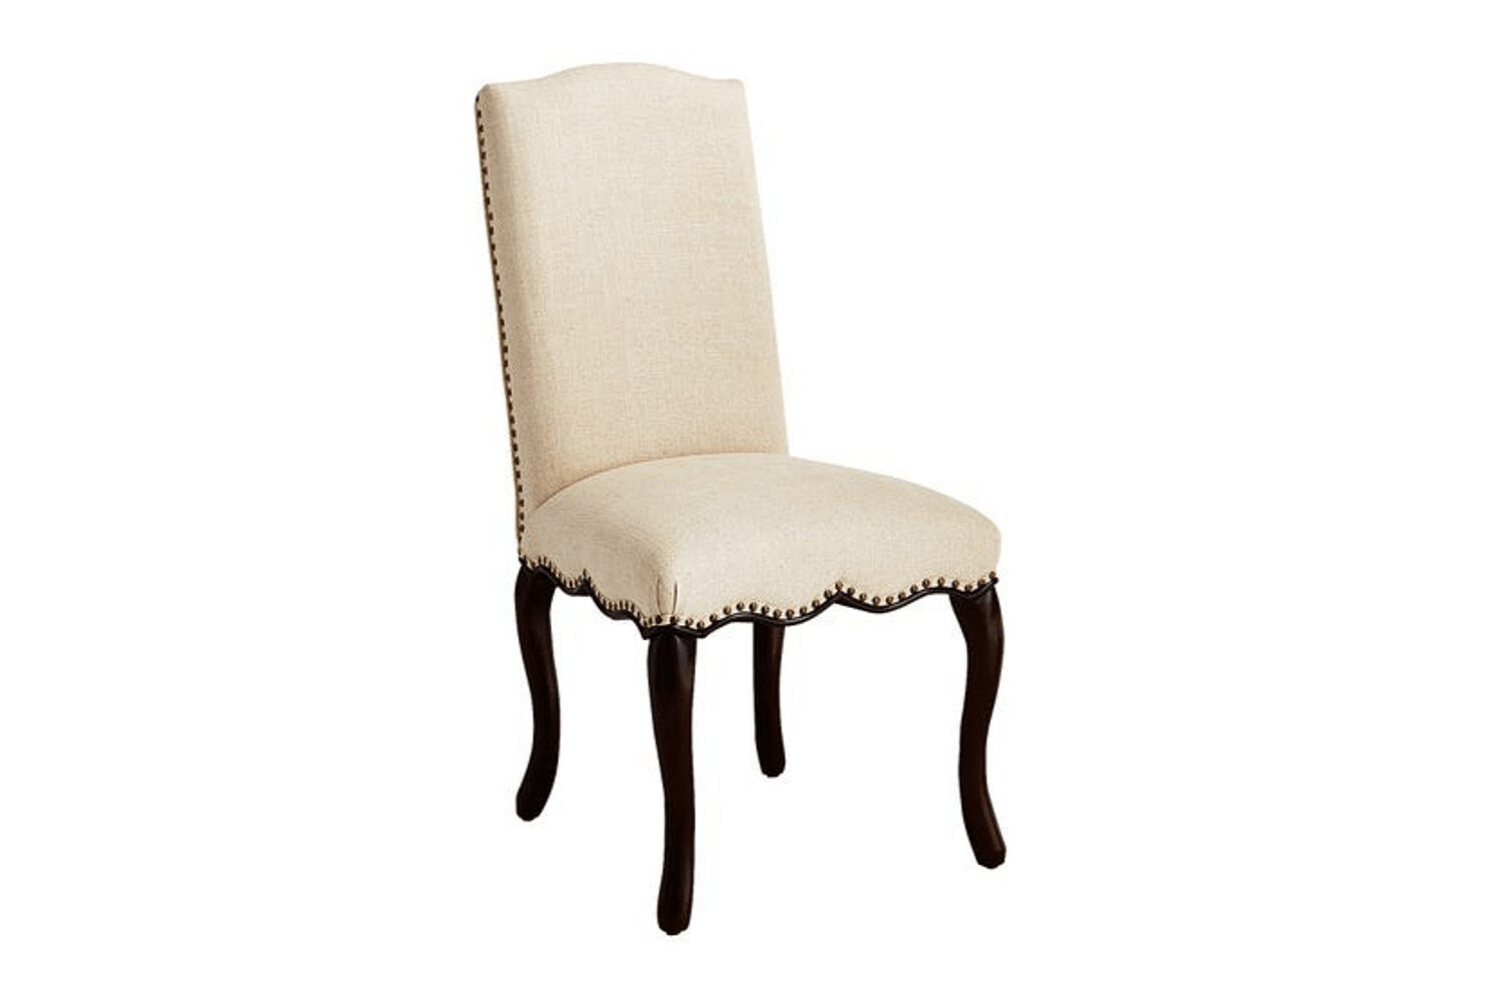 Pier One Dining Room Chair Covers